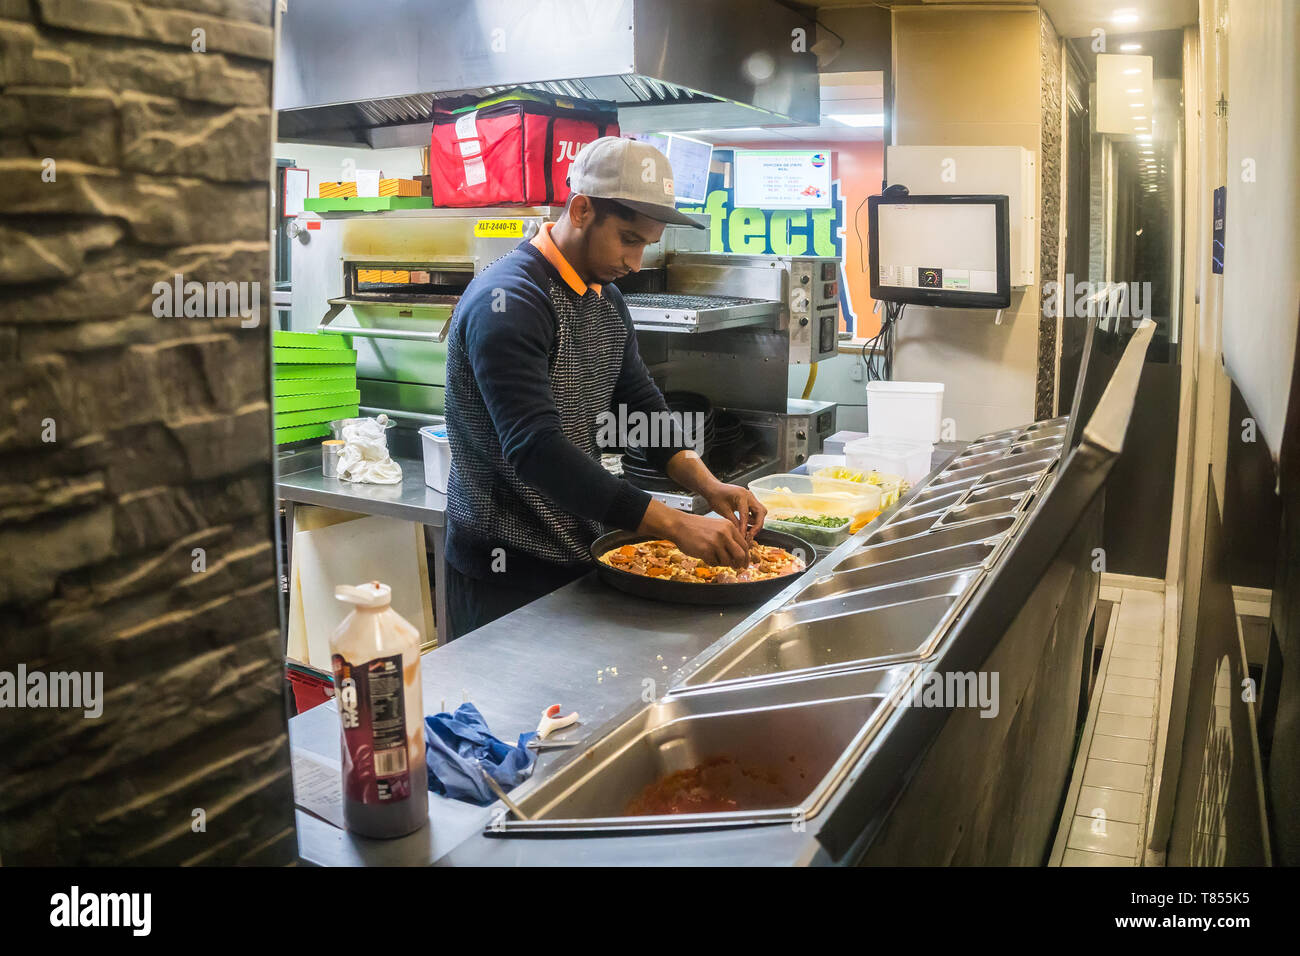 Stevenage, UK - January 24, 2019 - a cook at a restaurant kitchen Stock Photo